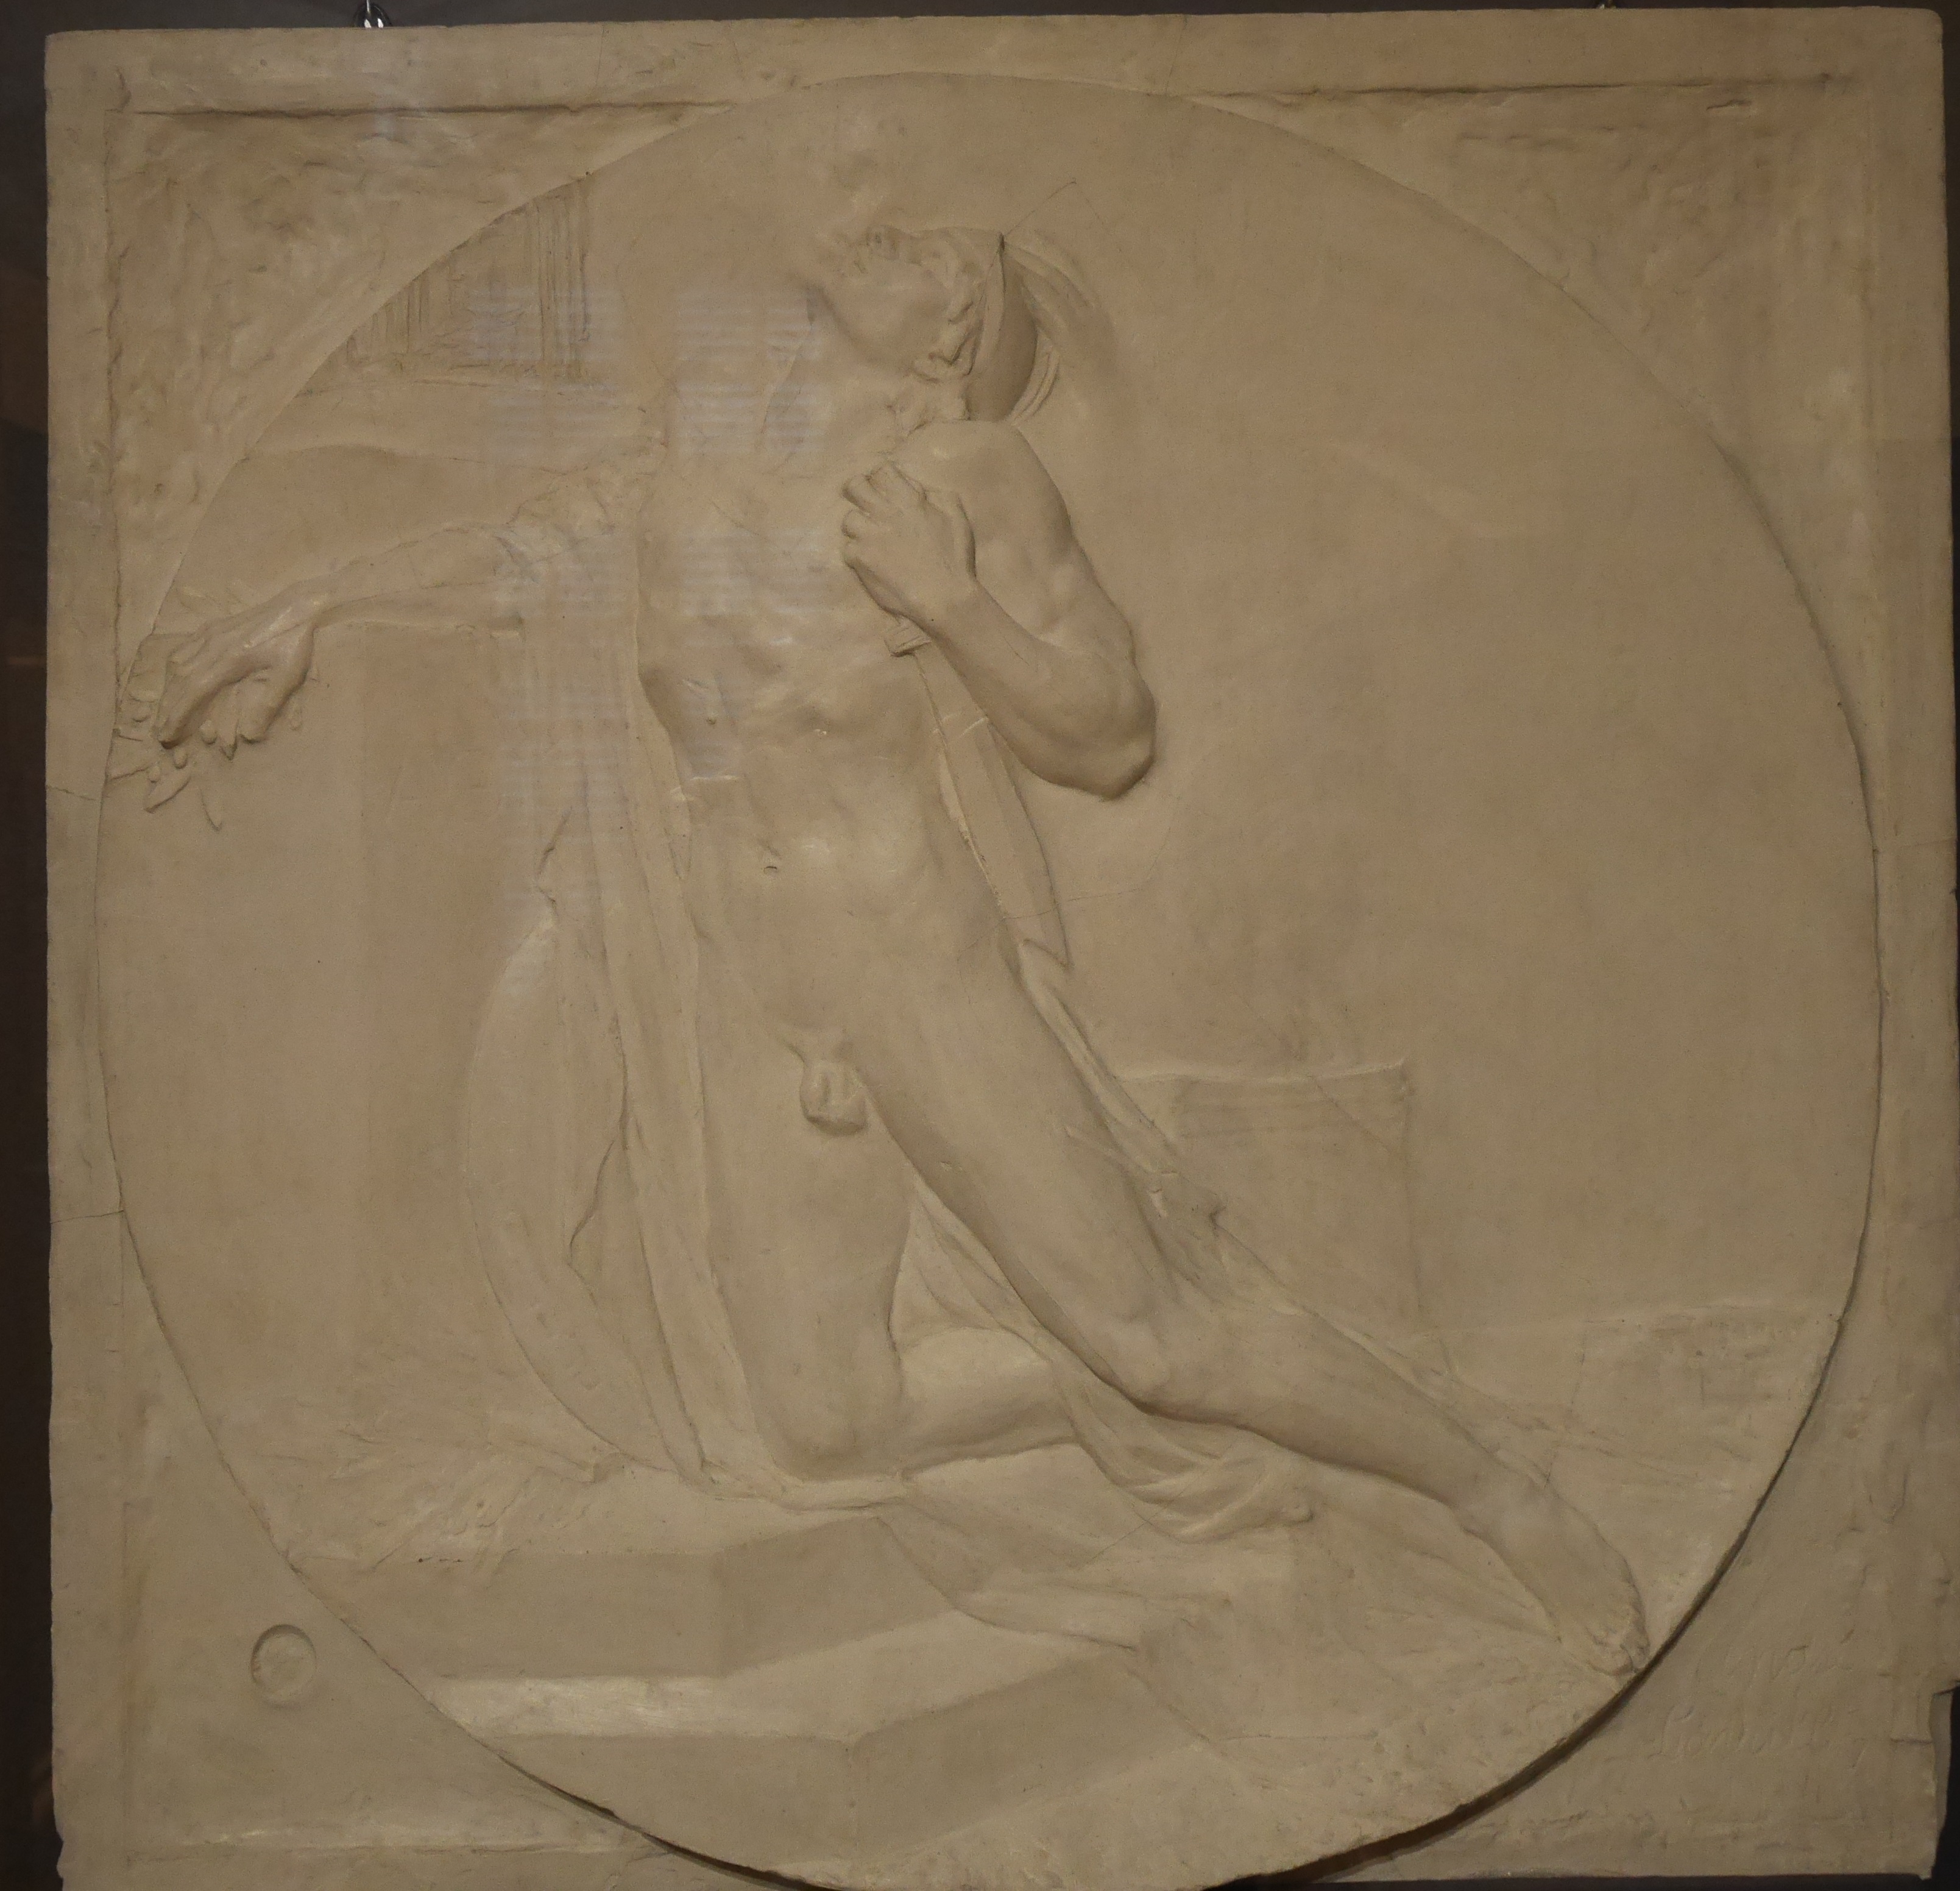 1914_Medaille-LAVRILLIER_Source-Musee-Rolin-AUTUN.jpg